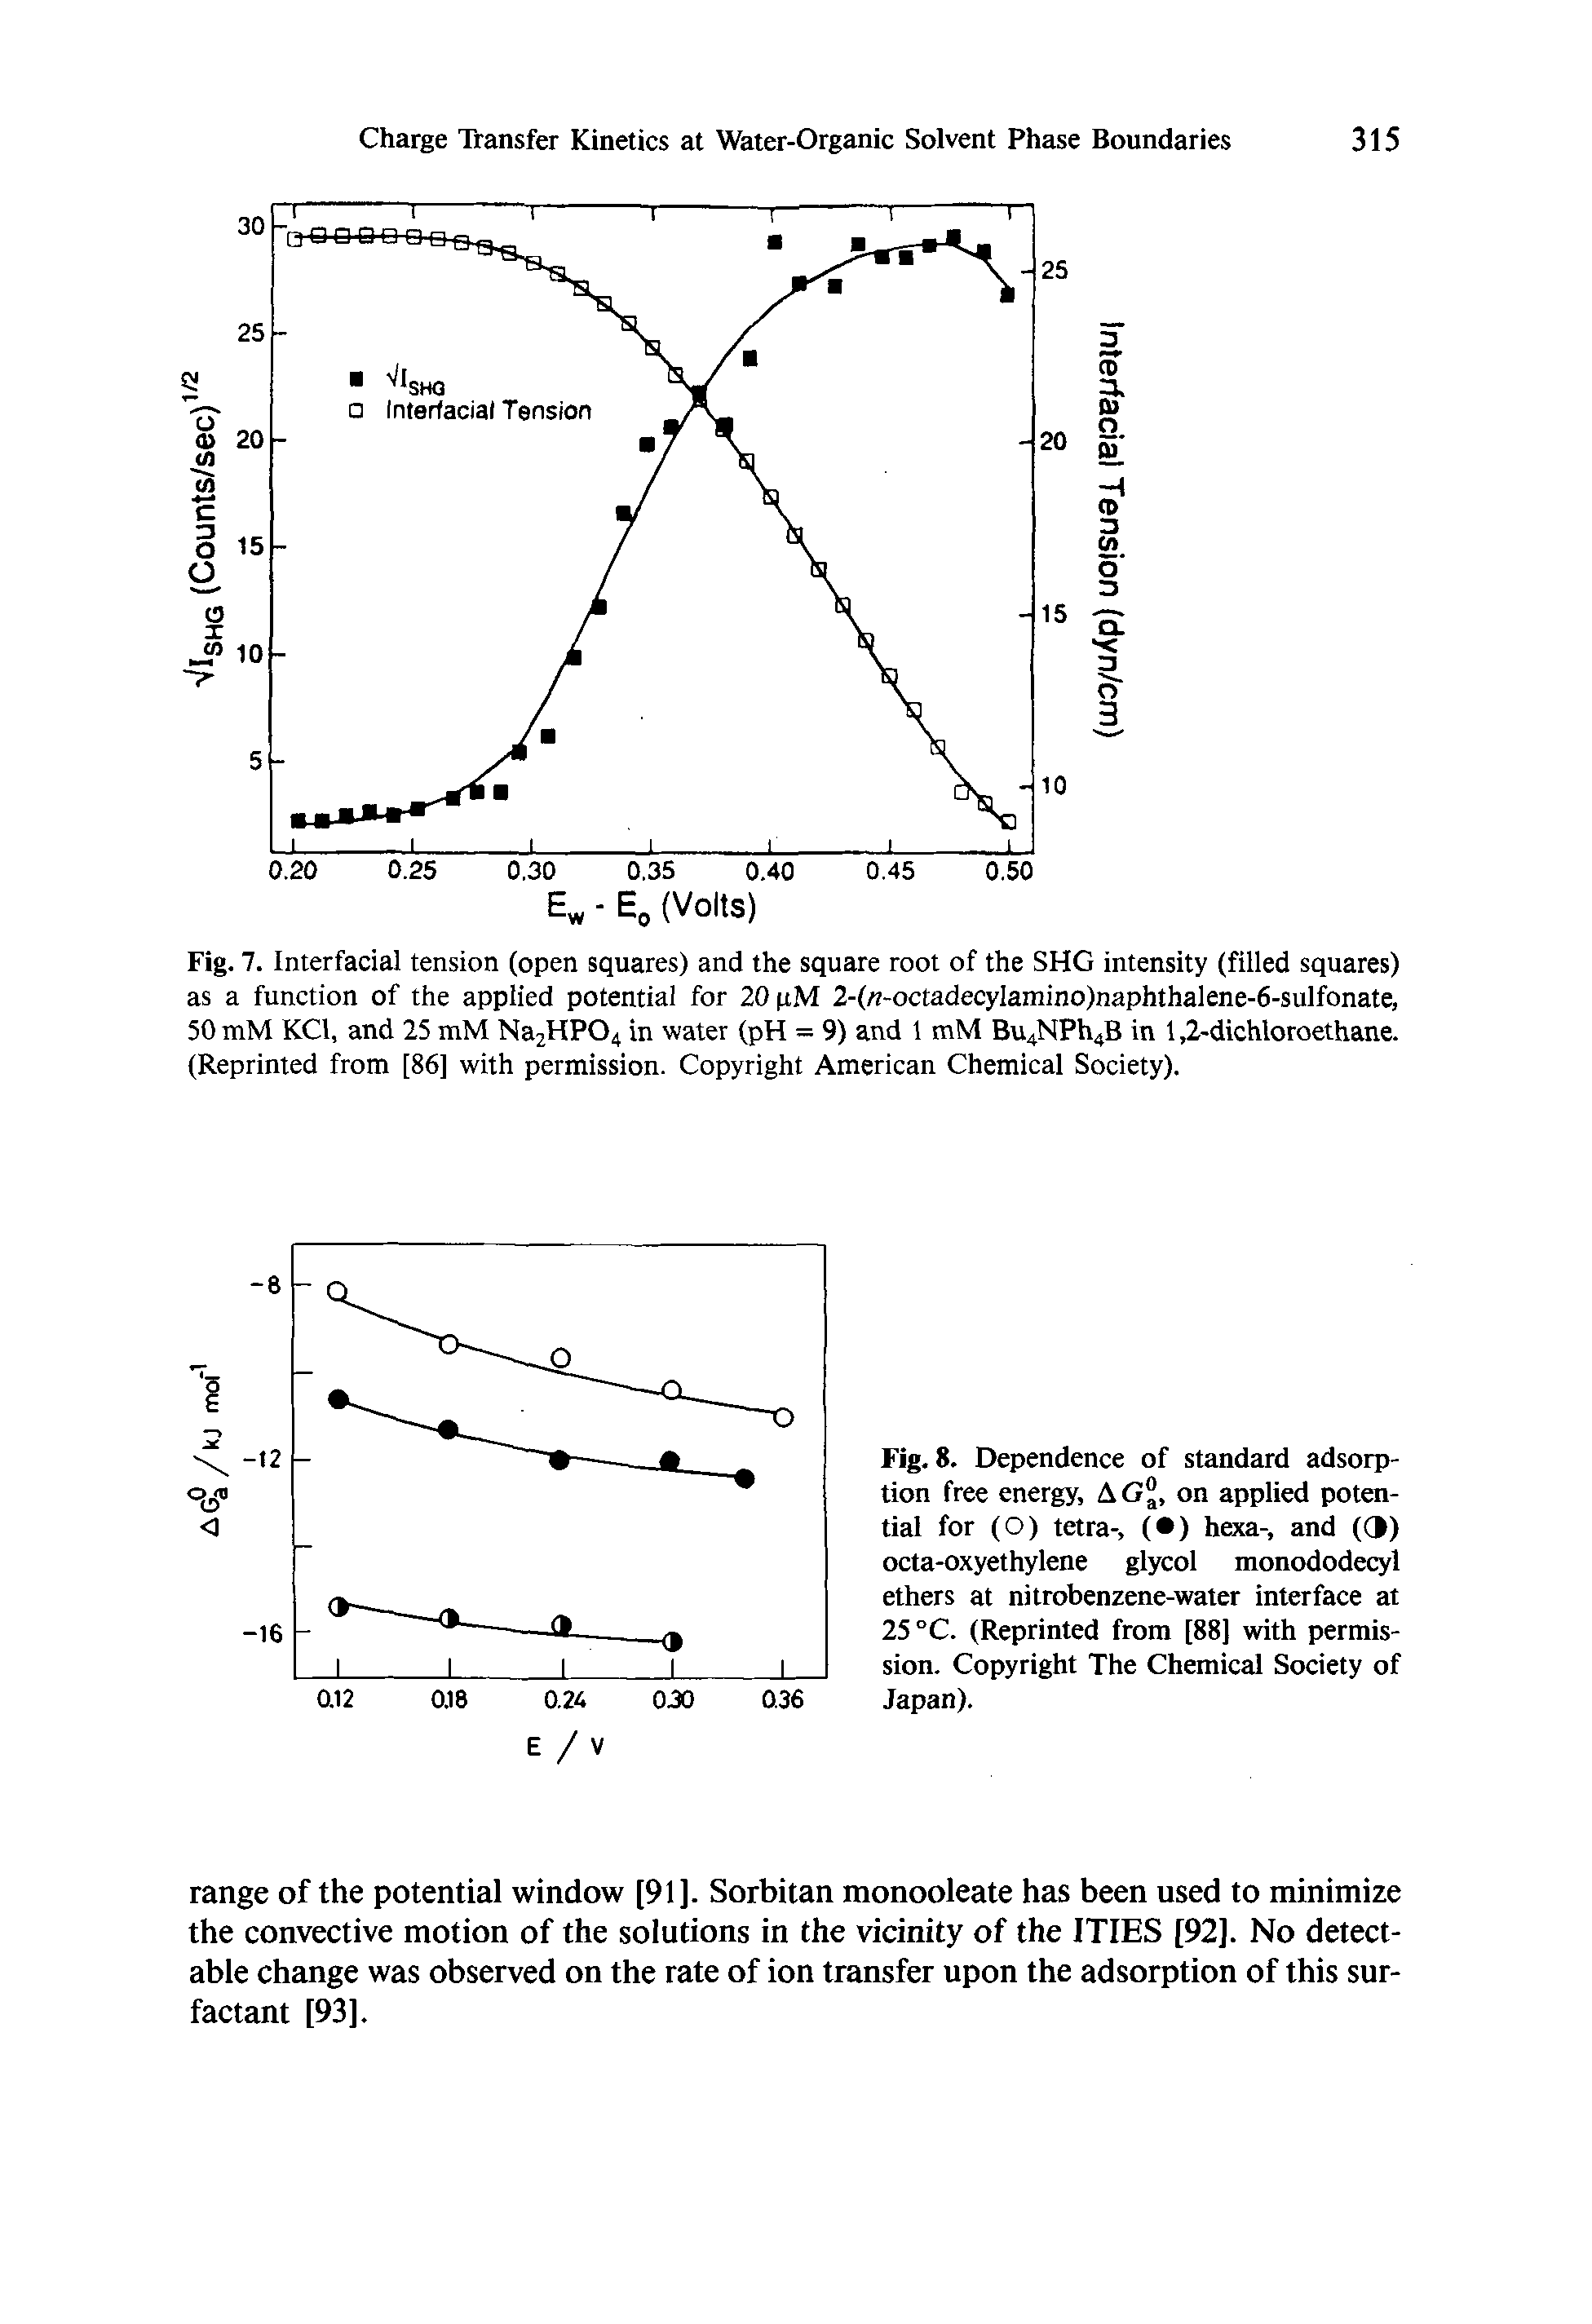 Fig. 8. Dependence of standard adsorption free energy, AG , on applied potential for (O) tetra-, ( ) hexa-, and (3) octa-oxyethylene glycol monododecyl ethers at nitrobenzene-water interface at 25 °C. (Reprinted from [88] with permission. Copyright The Chemical Society of Japan).